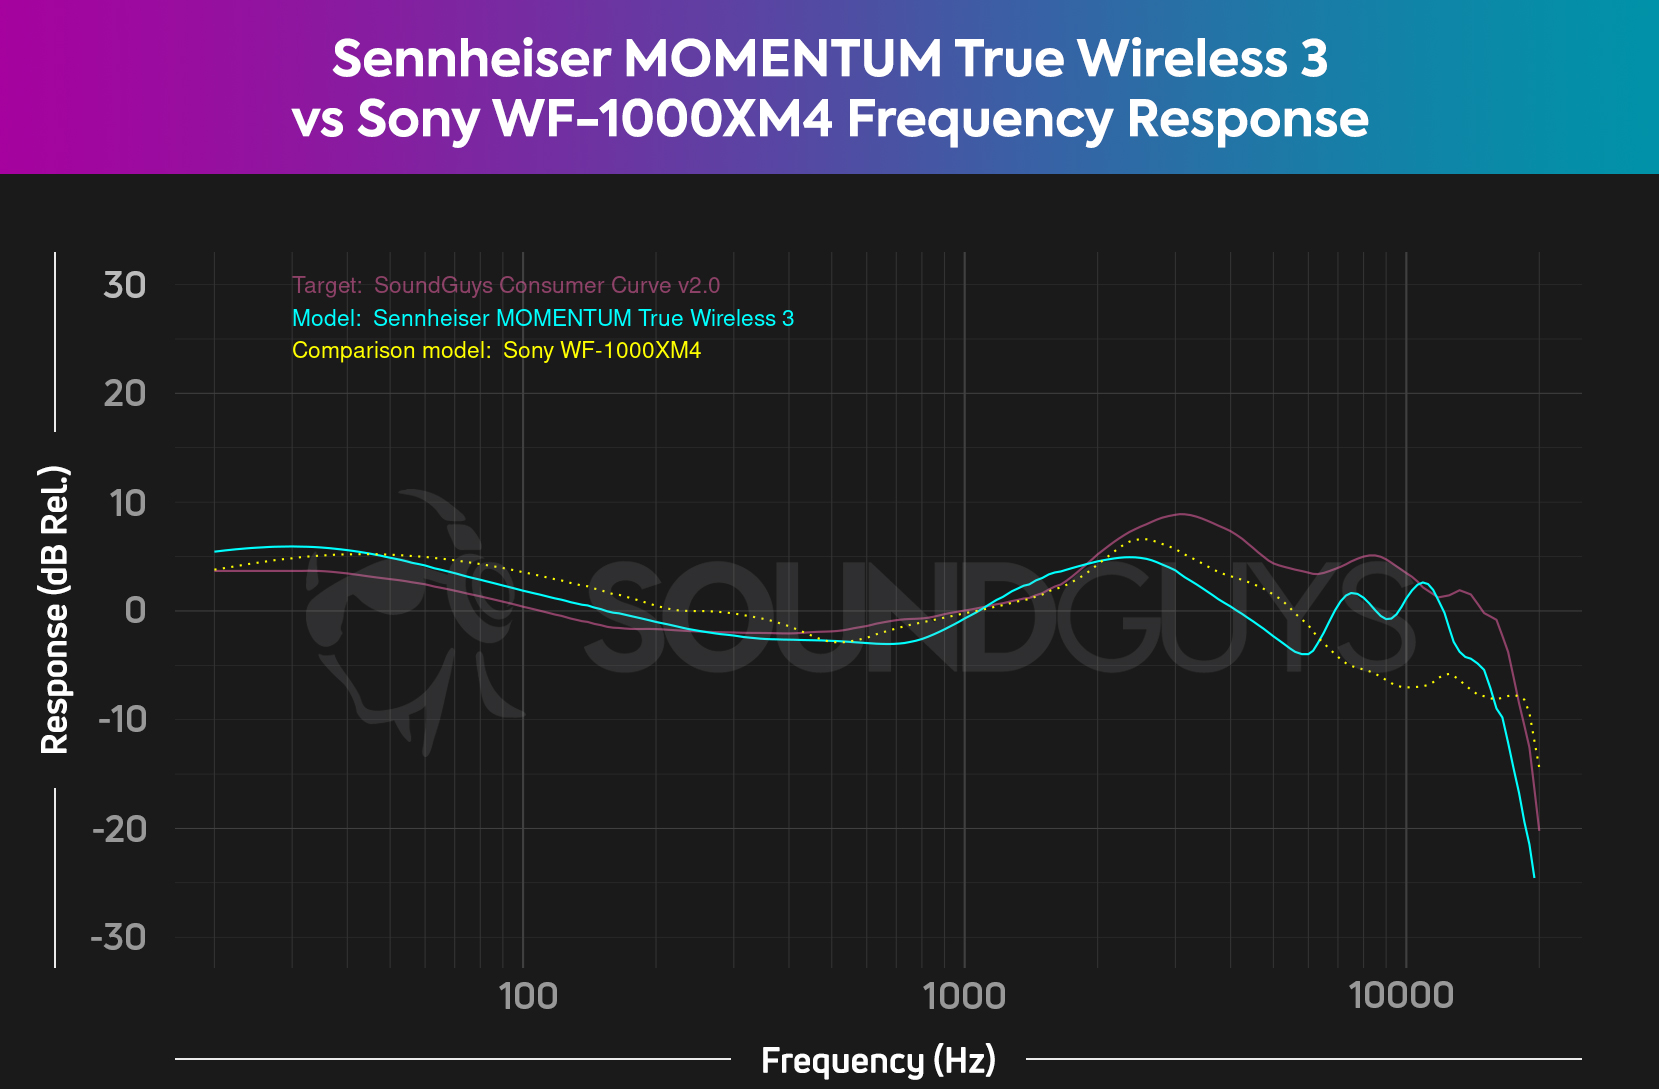 Chart shows the Sennheiser MOMENTUM True Wireless 3 frequency response compared to Sony WF-1000XM4 and our target curve.